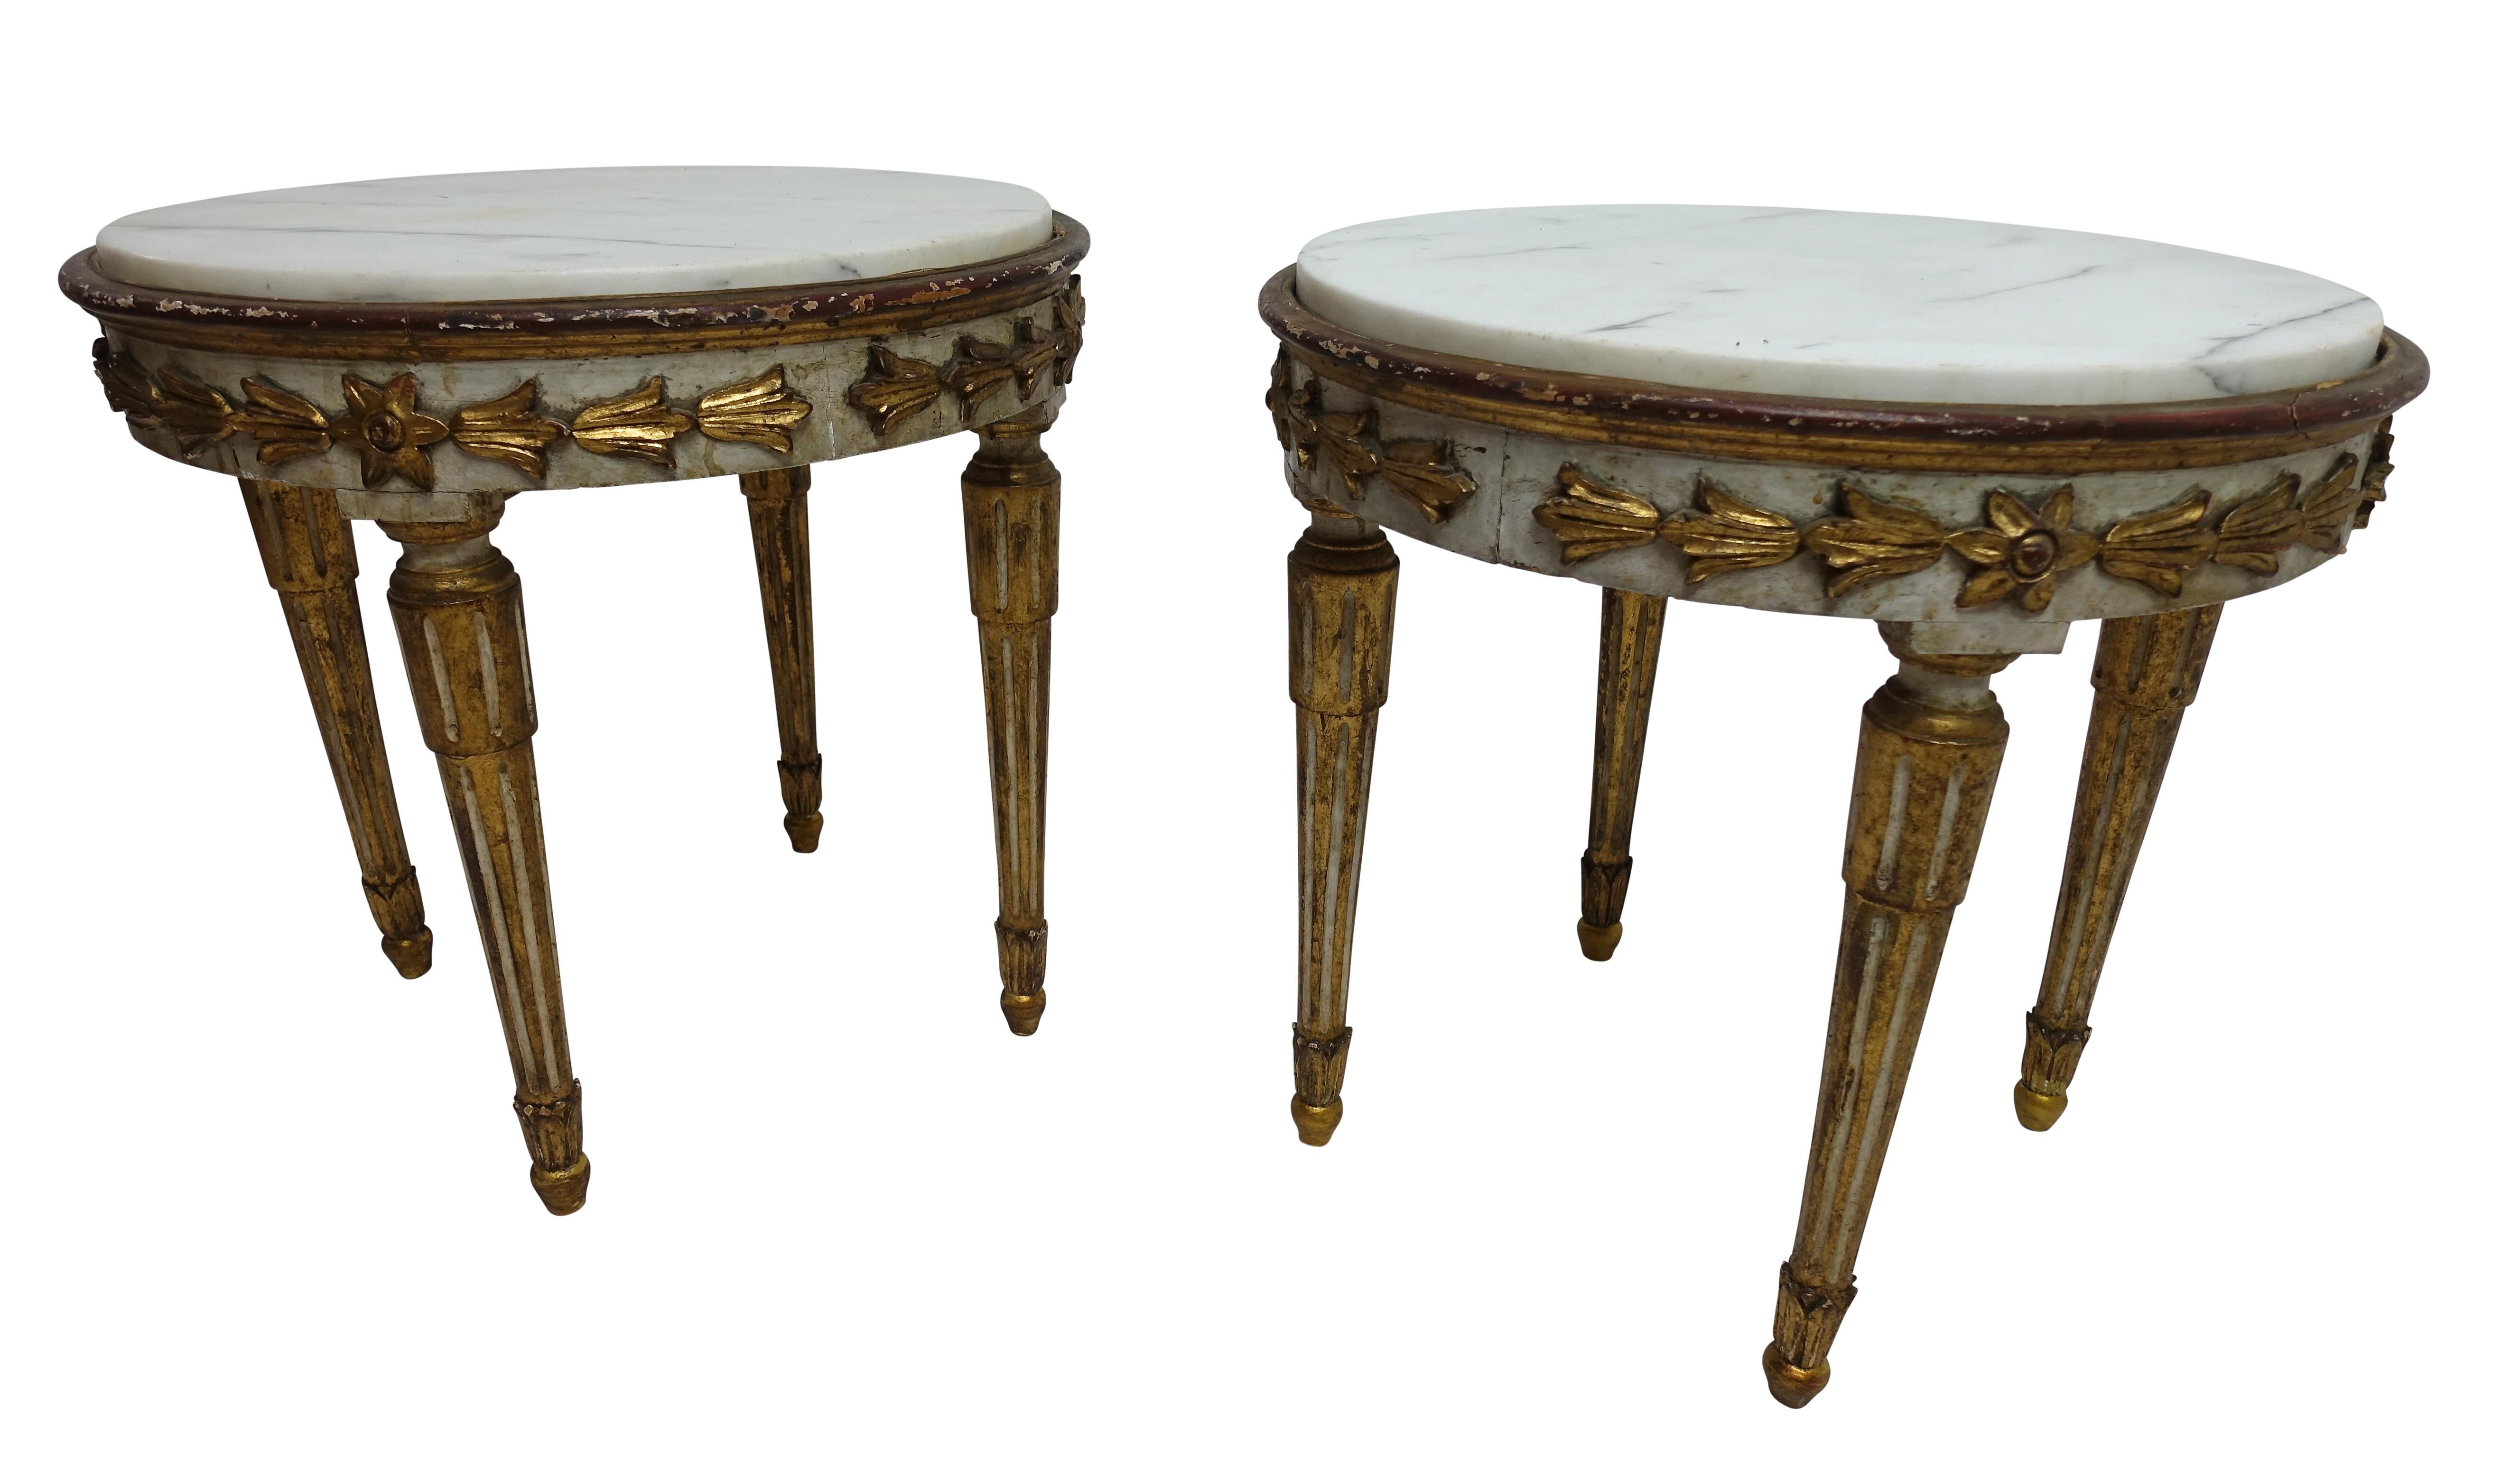 A pair of small round low side tables, painted and hand-carved with gilt floral decorations, having marble tops and standing on tapering fluted legs. Beautifully aged with expected and appropriate wear. Italian, 18th century.